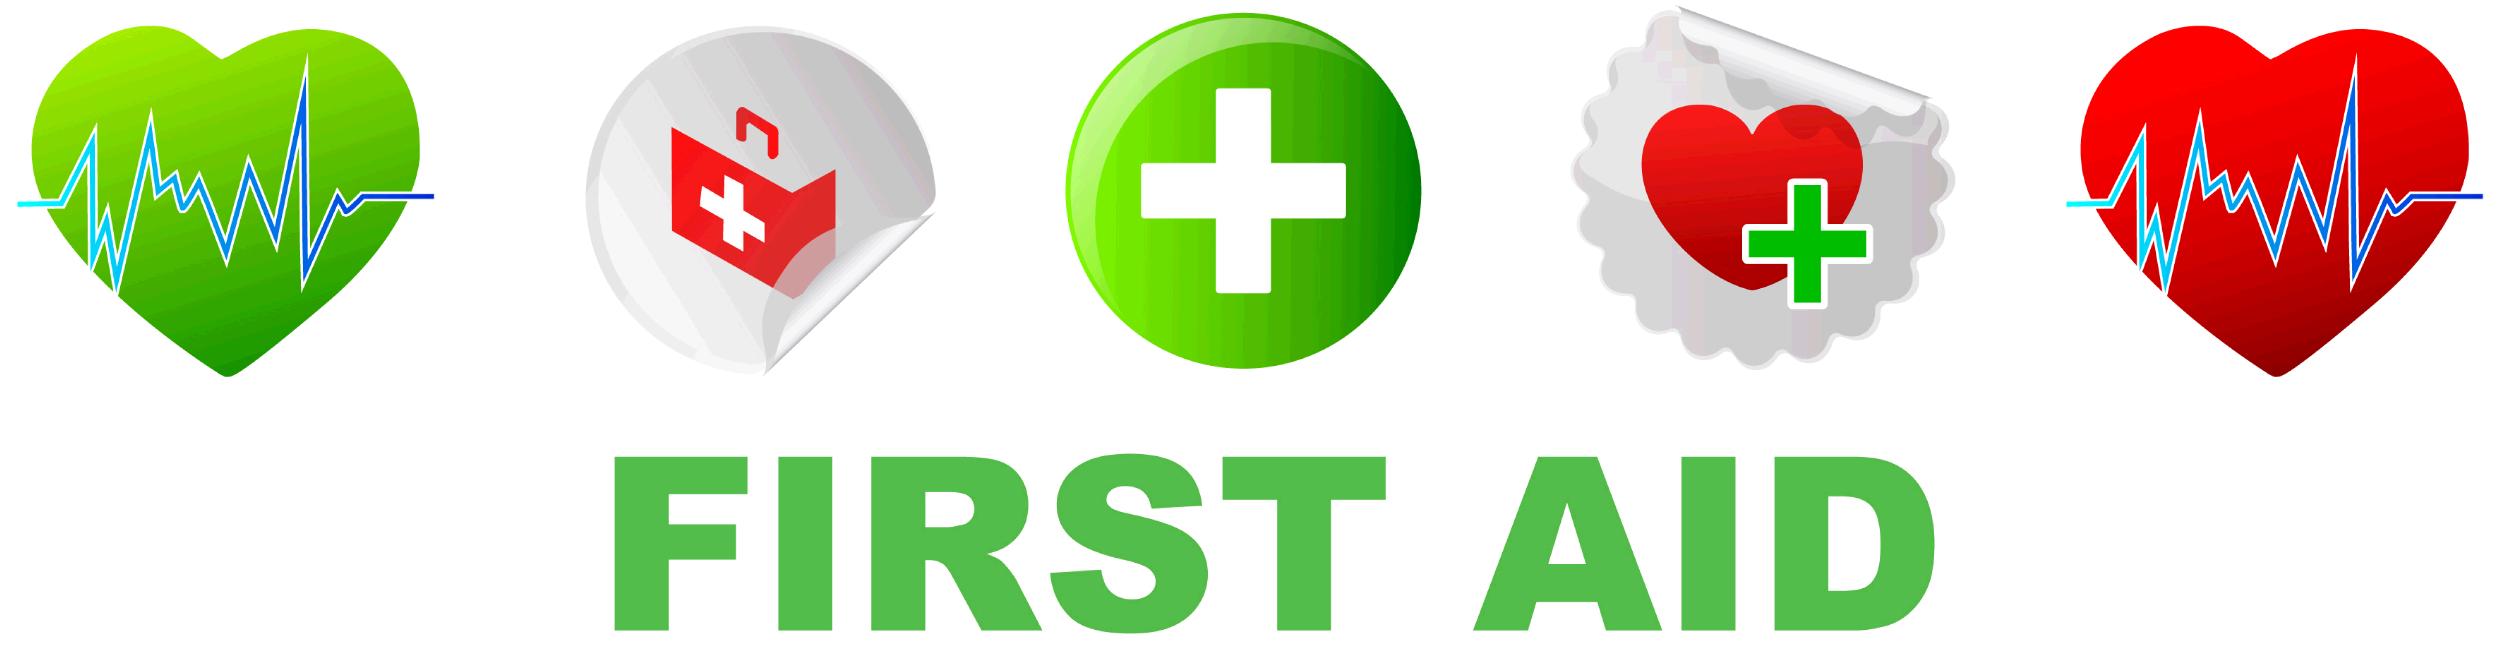 FIRSTAID1